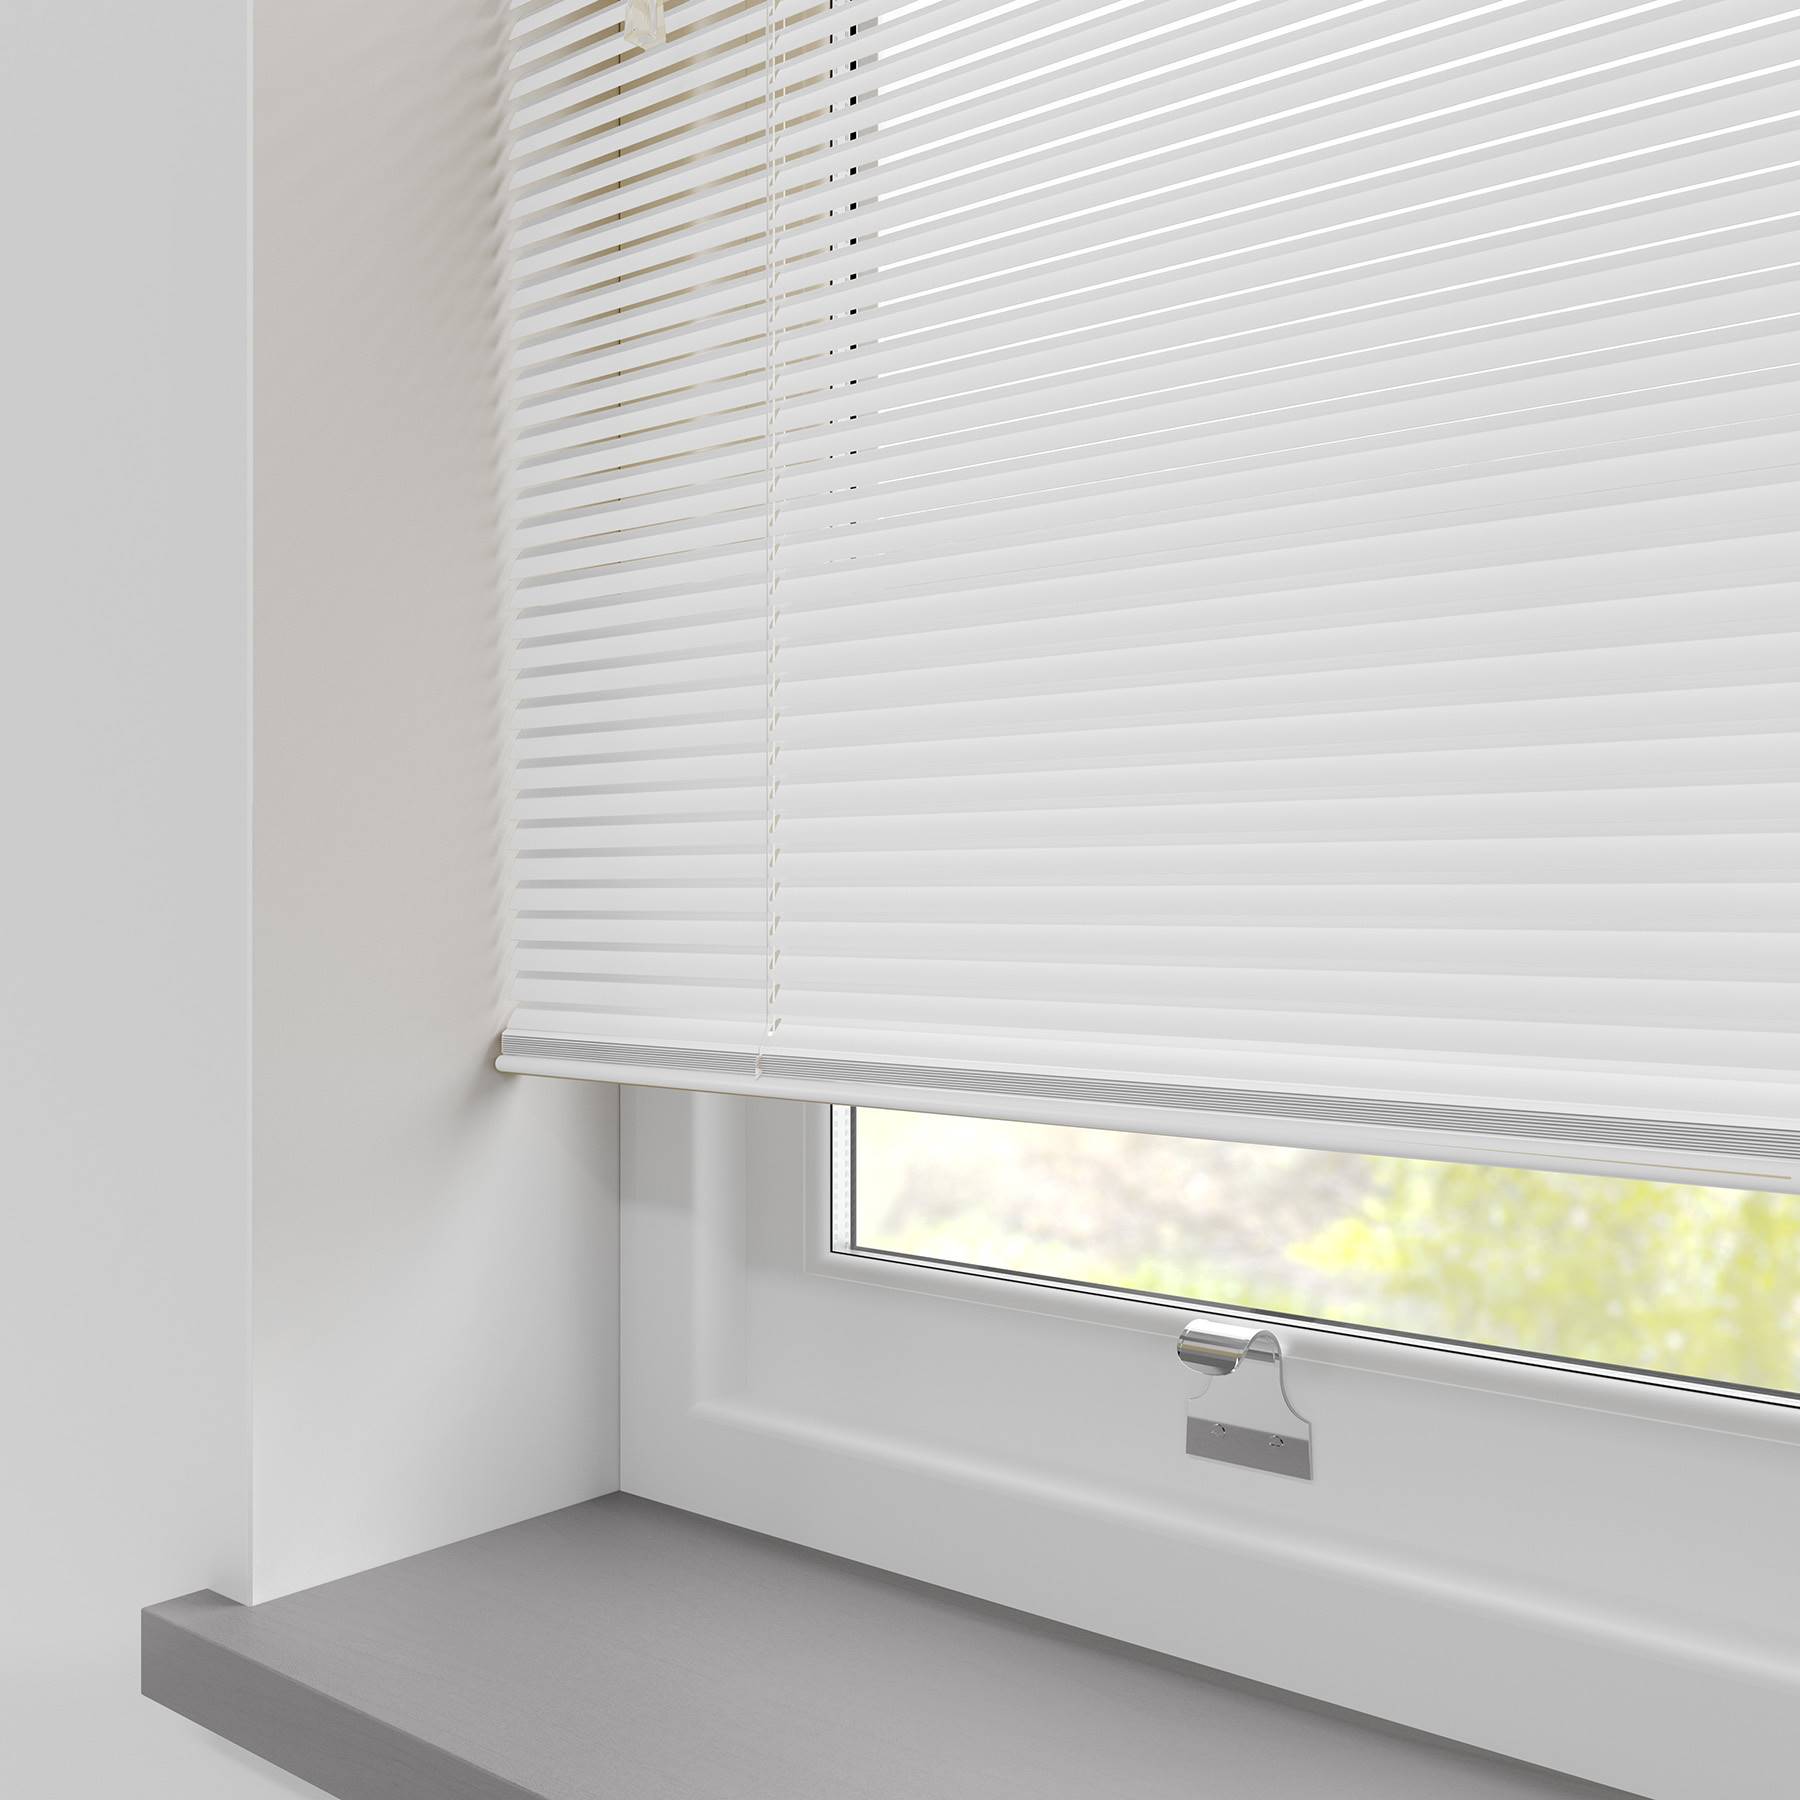 Micro Blinds